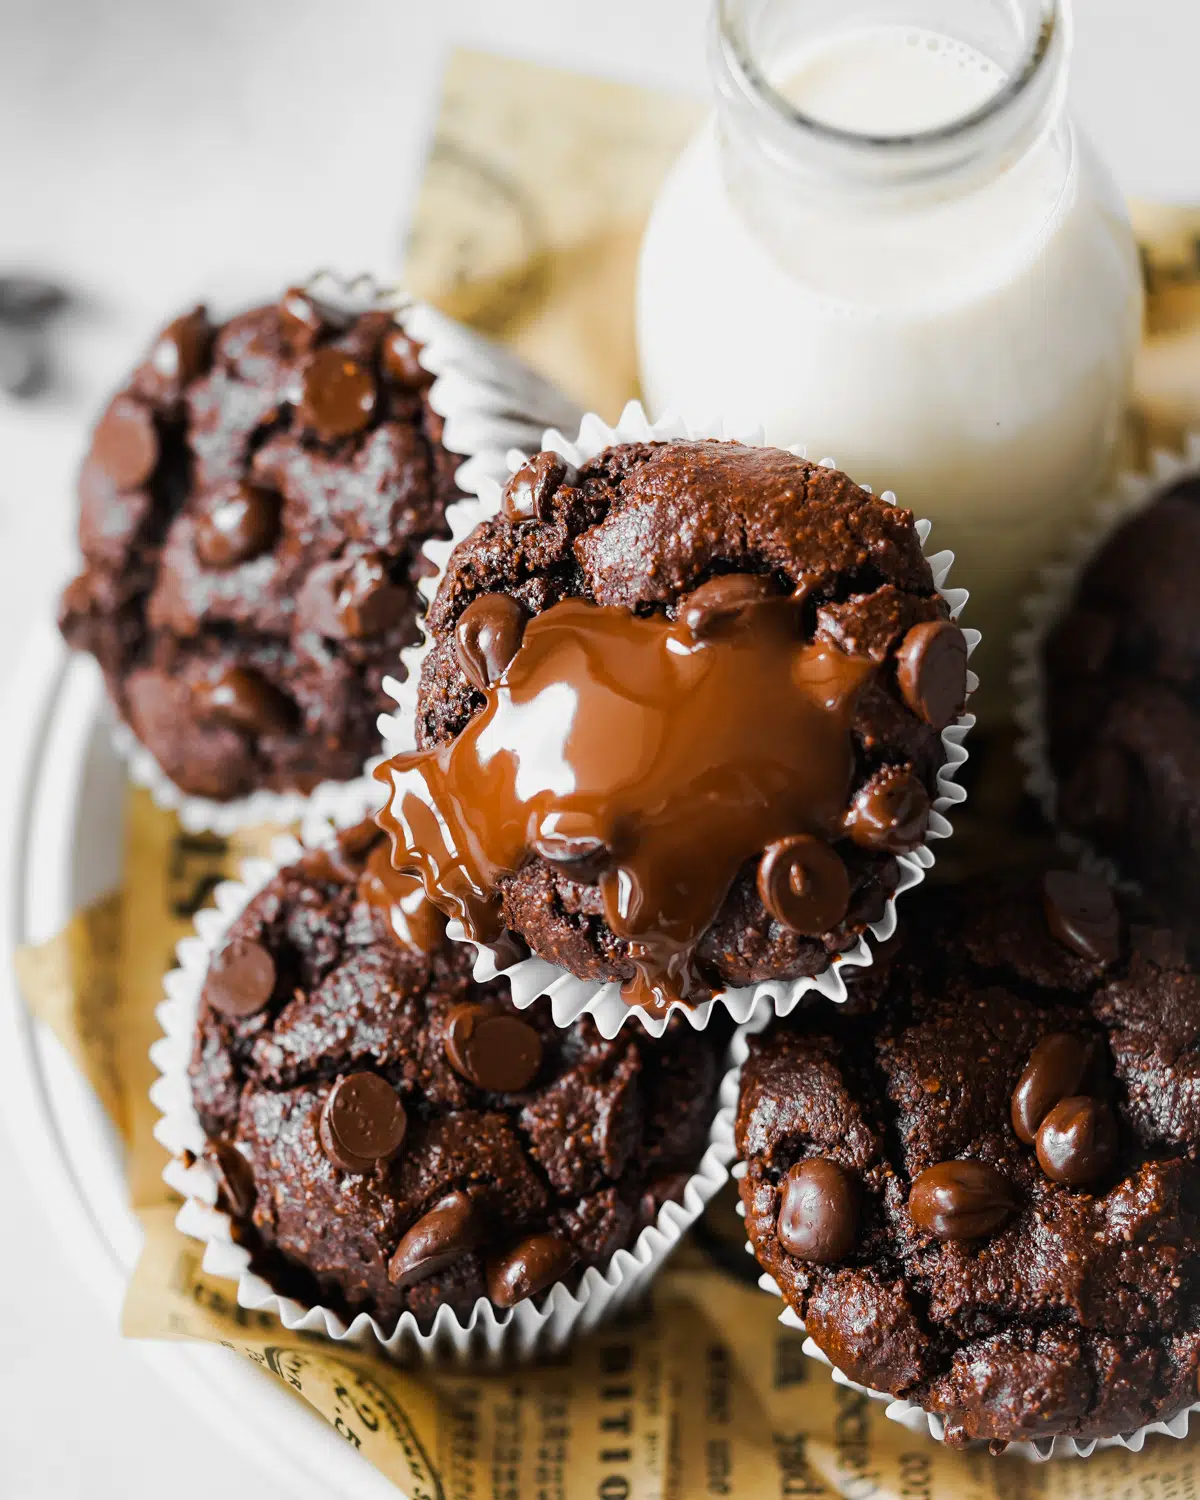 chocolate muffins with melted chocolate on top and a jug of milk.